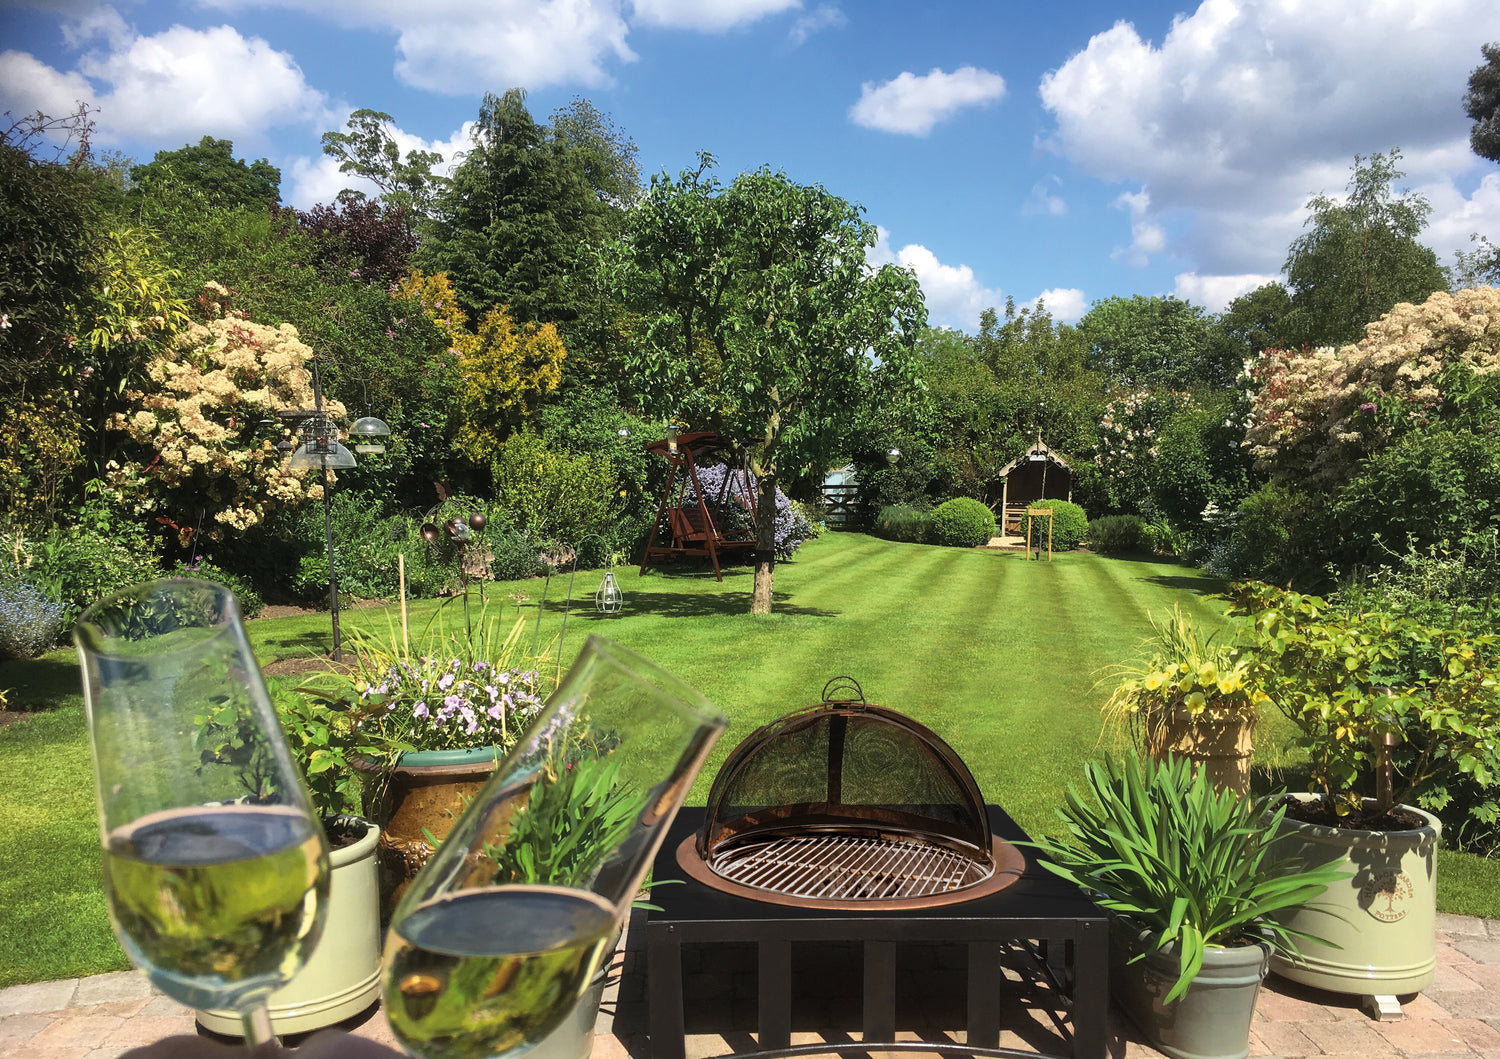 Champagne flutes, BBQ and a lovely striped GreenThumb lawn